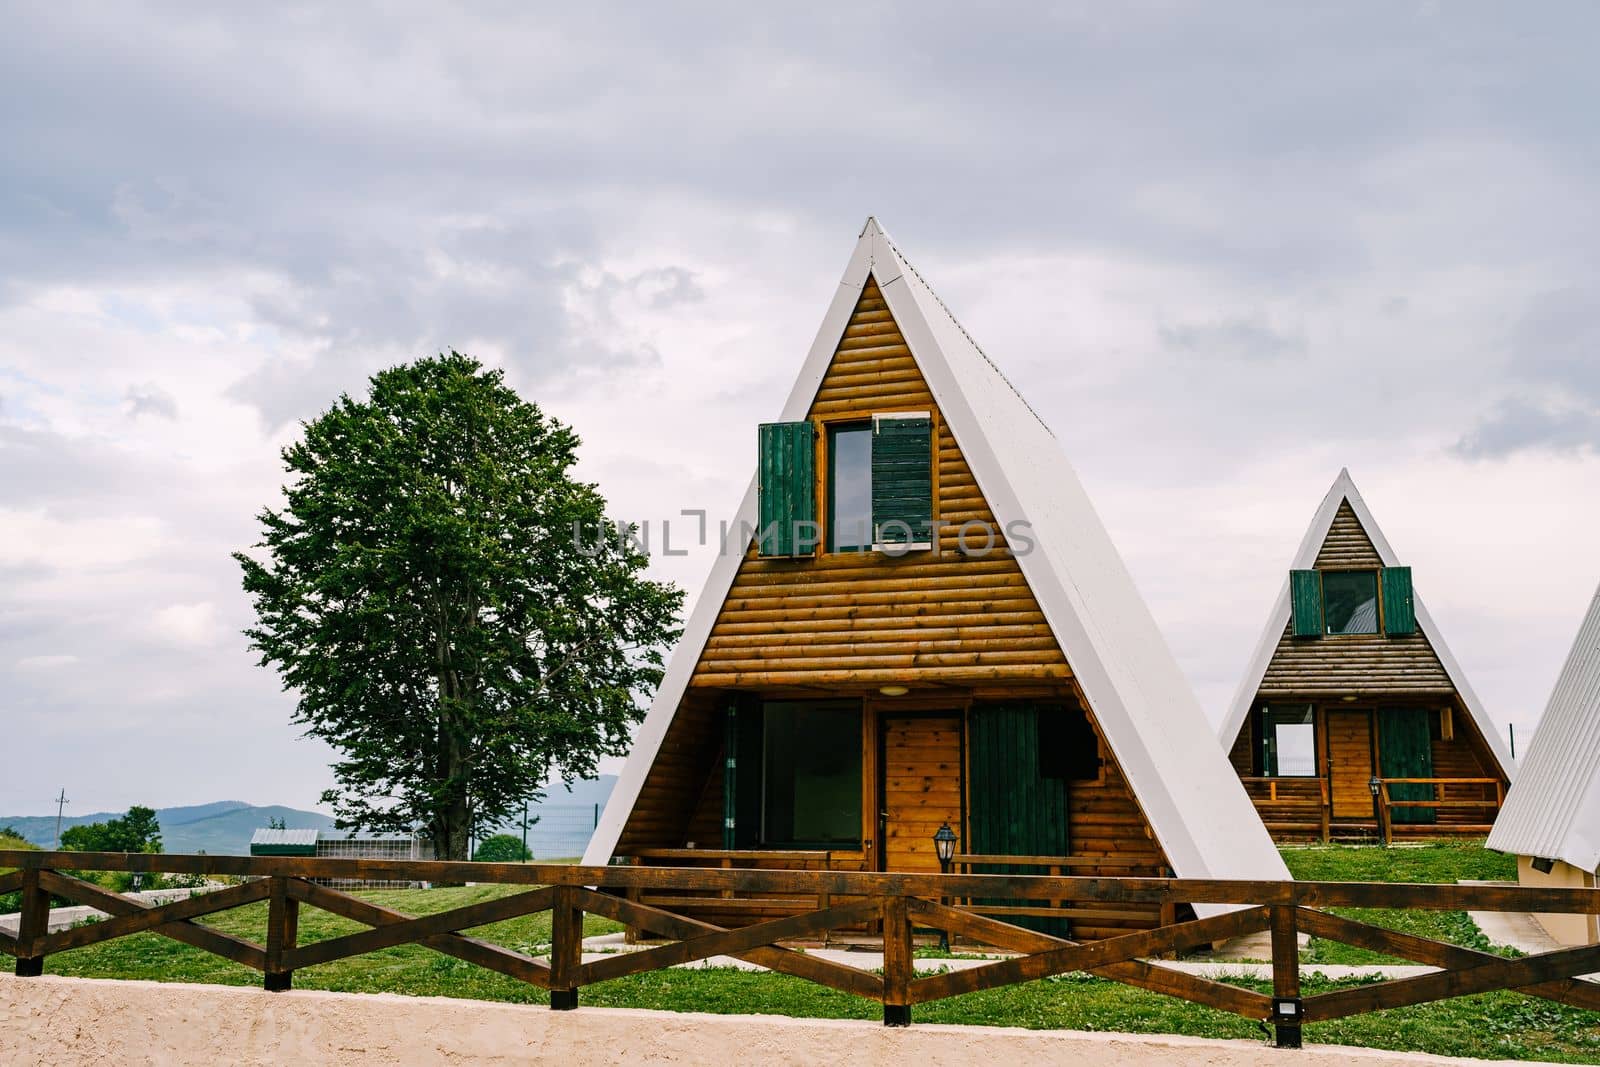 Triangular wooden two-story houses in Durmitor National Park. High quality photo